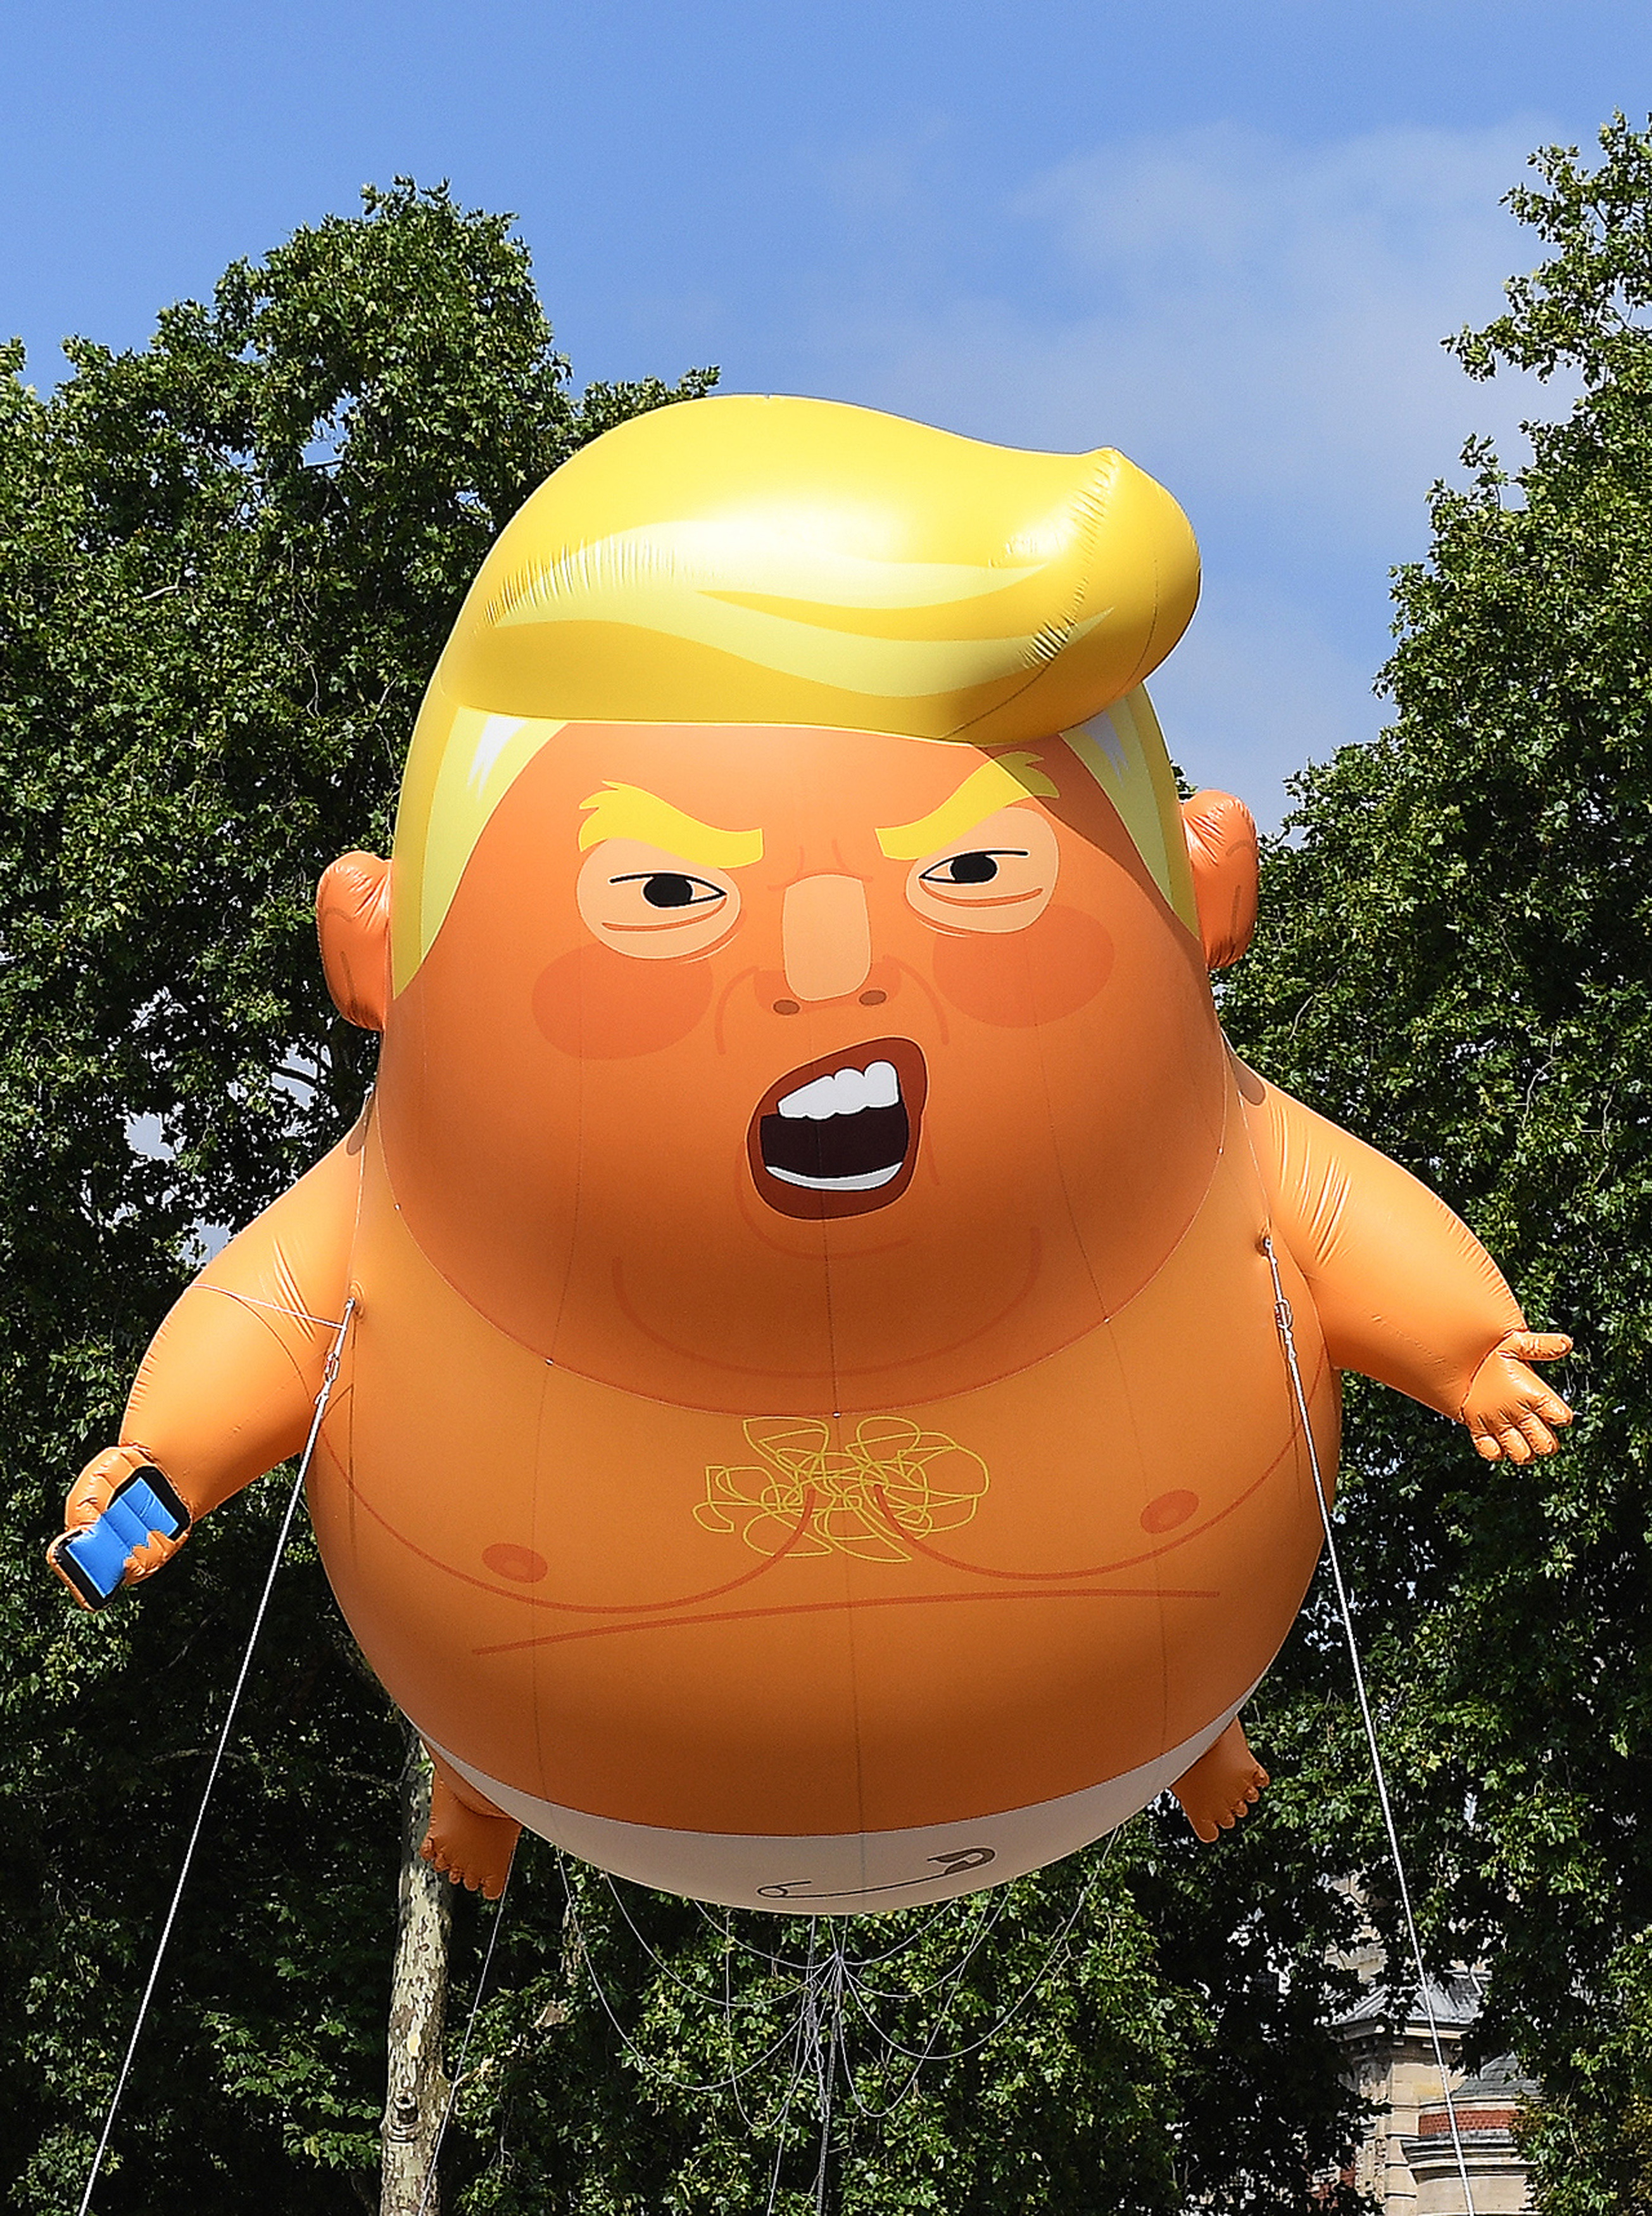 epa06885294 The 'Donald Trump Baby Blimp' balloon flies over Parliament Square during a protest in London, Britain, 13 July 2018. The inflatable dubbed 'Trump Baby' tied to a spot in Parliament Square is to kick off a day of protests against US President Donald J. Trump's visit. Trump is on a working visit to Britain.  EPA/ANDY RAIN